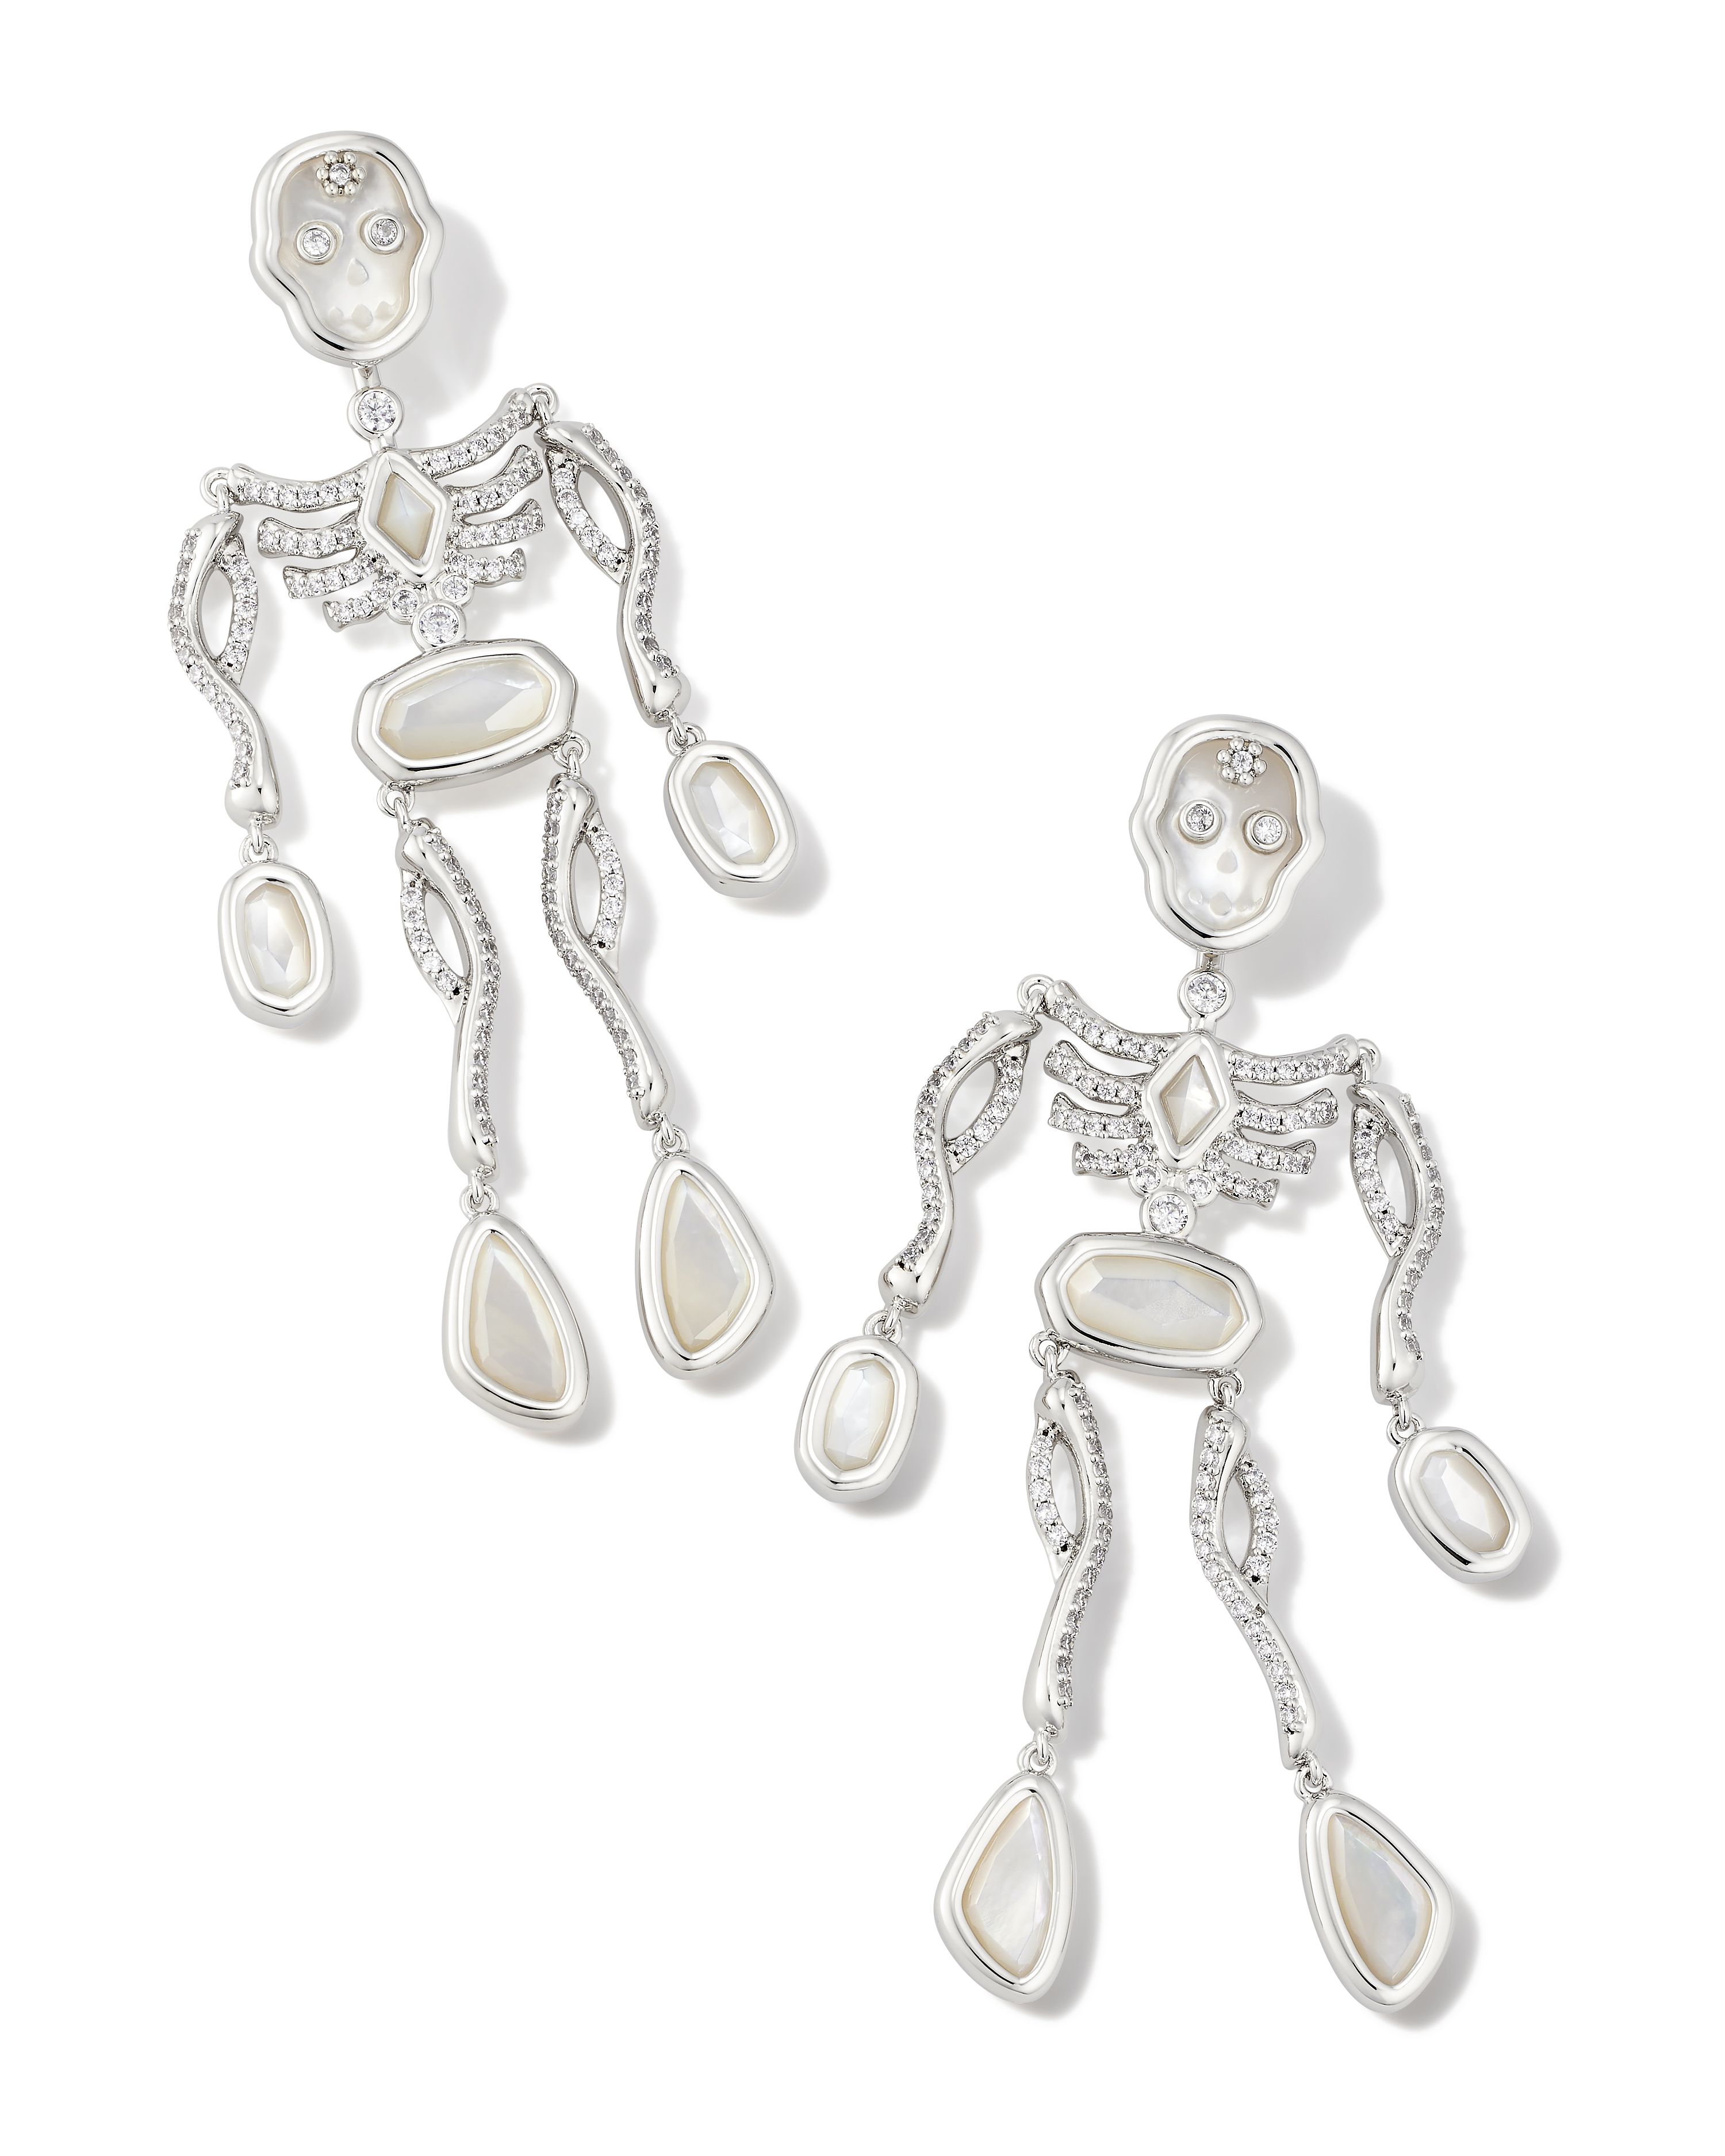 Skeleton Convertible Silver Statement Earrings in Ivory Mother-of-Pearl | Kendra Scott